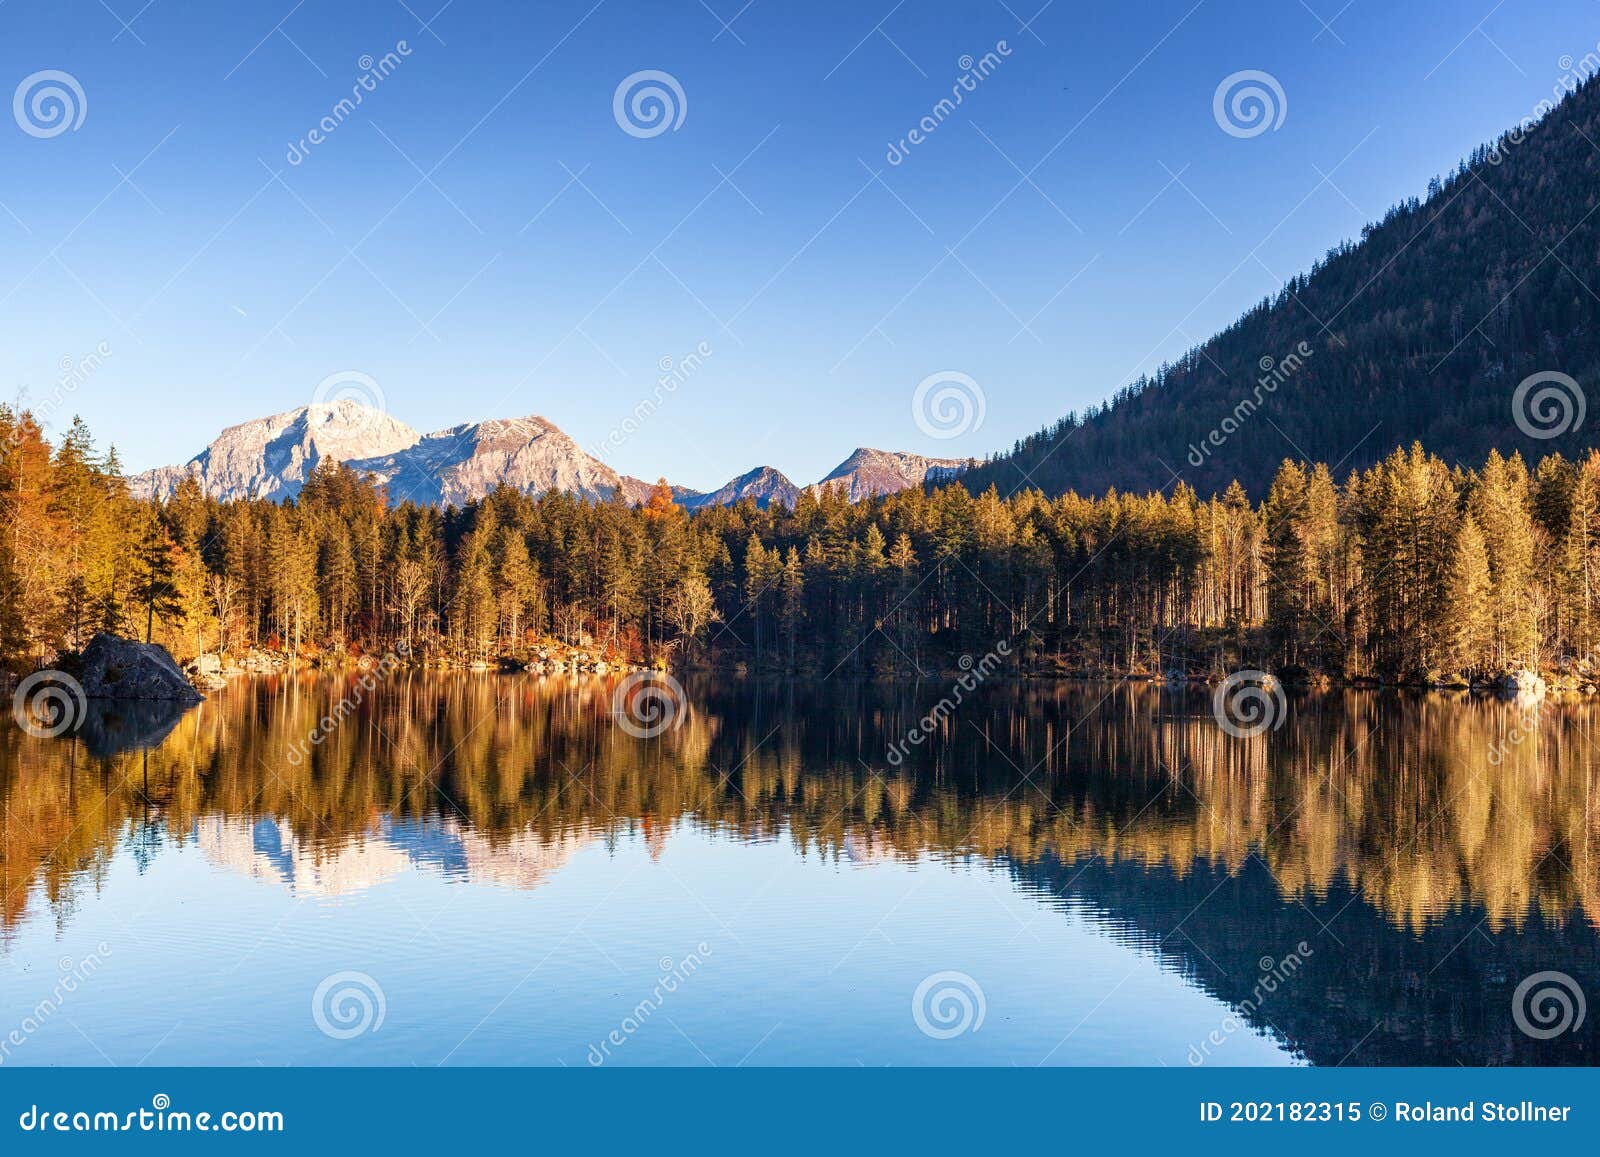 autumn at hintersee in the berchtesgadener land national park